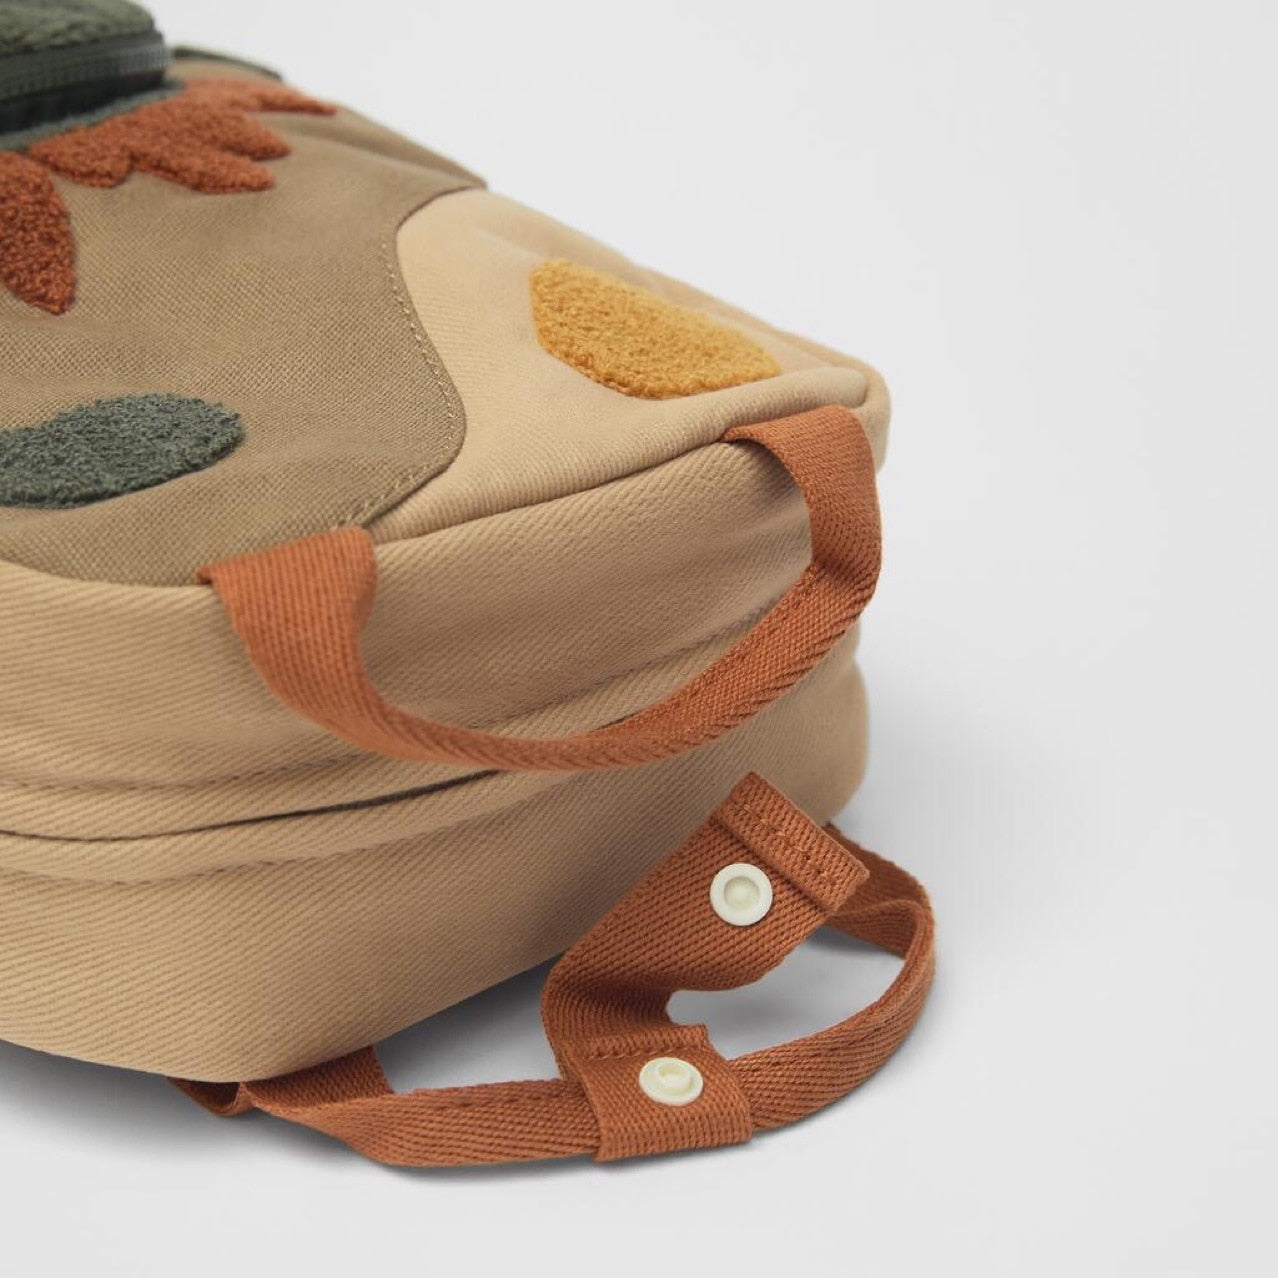 Embroidered Backpacks | Unique Designs for Kid Appeal itsykitschycoo